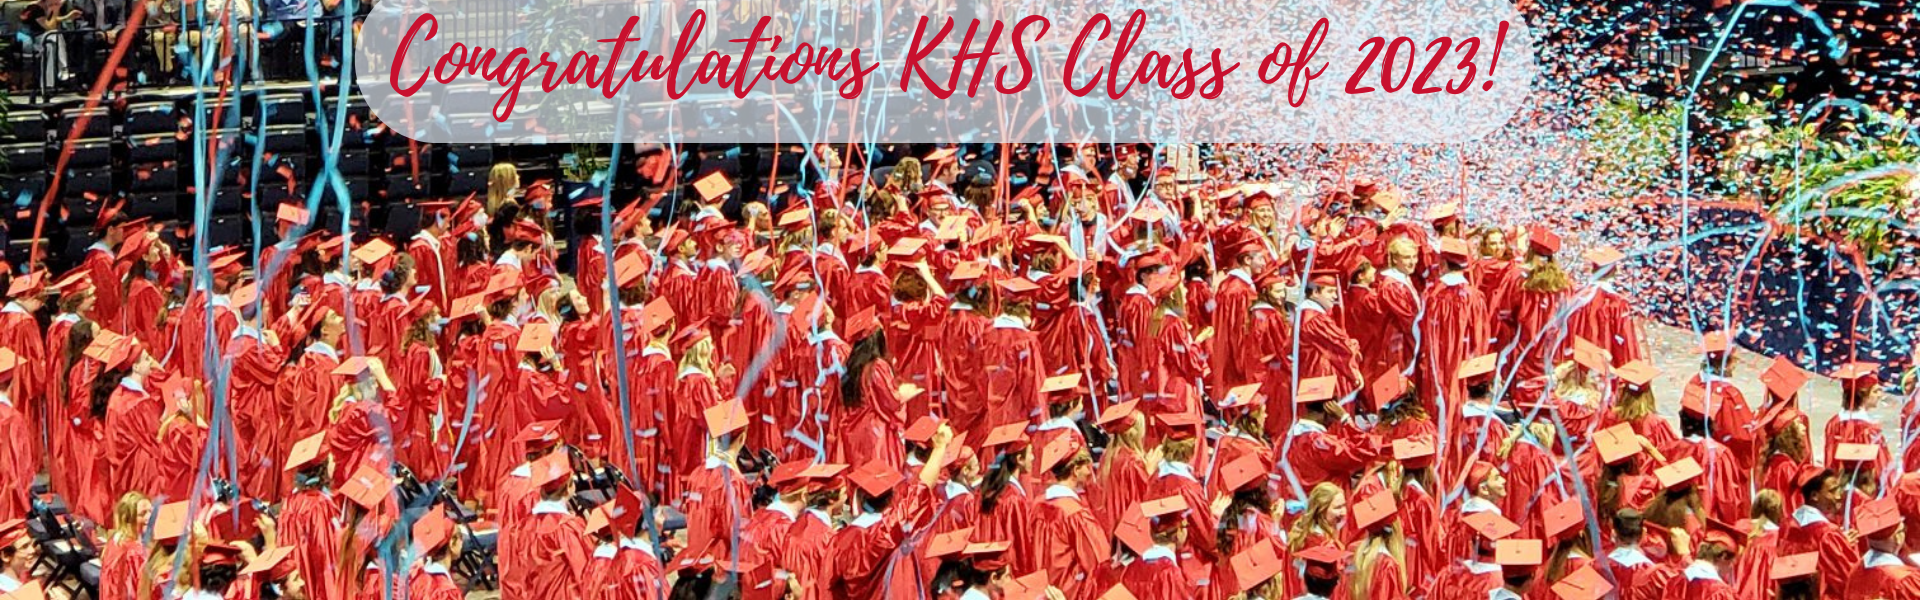 Congratulations to the KHSClass of 2023